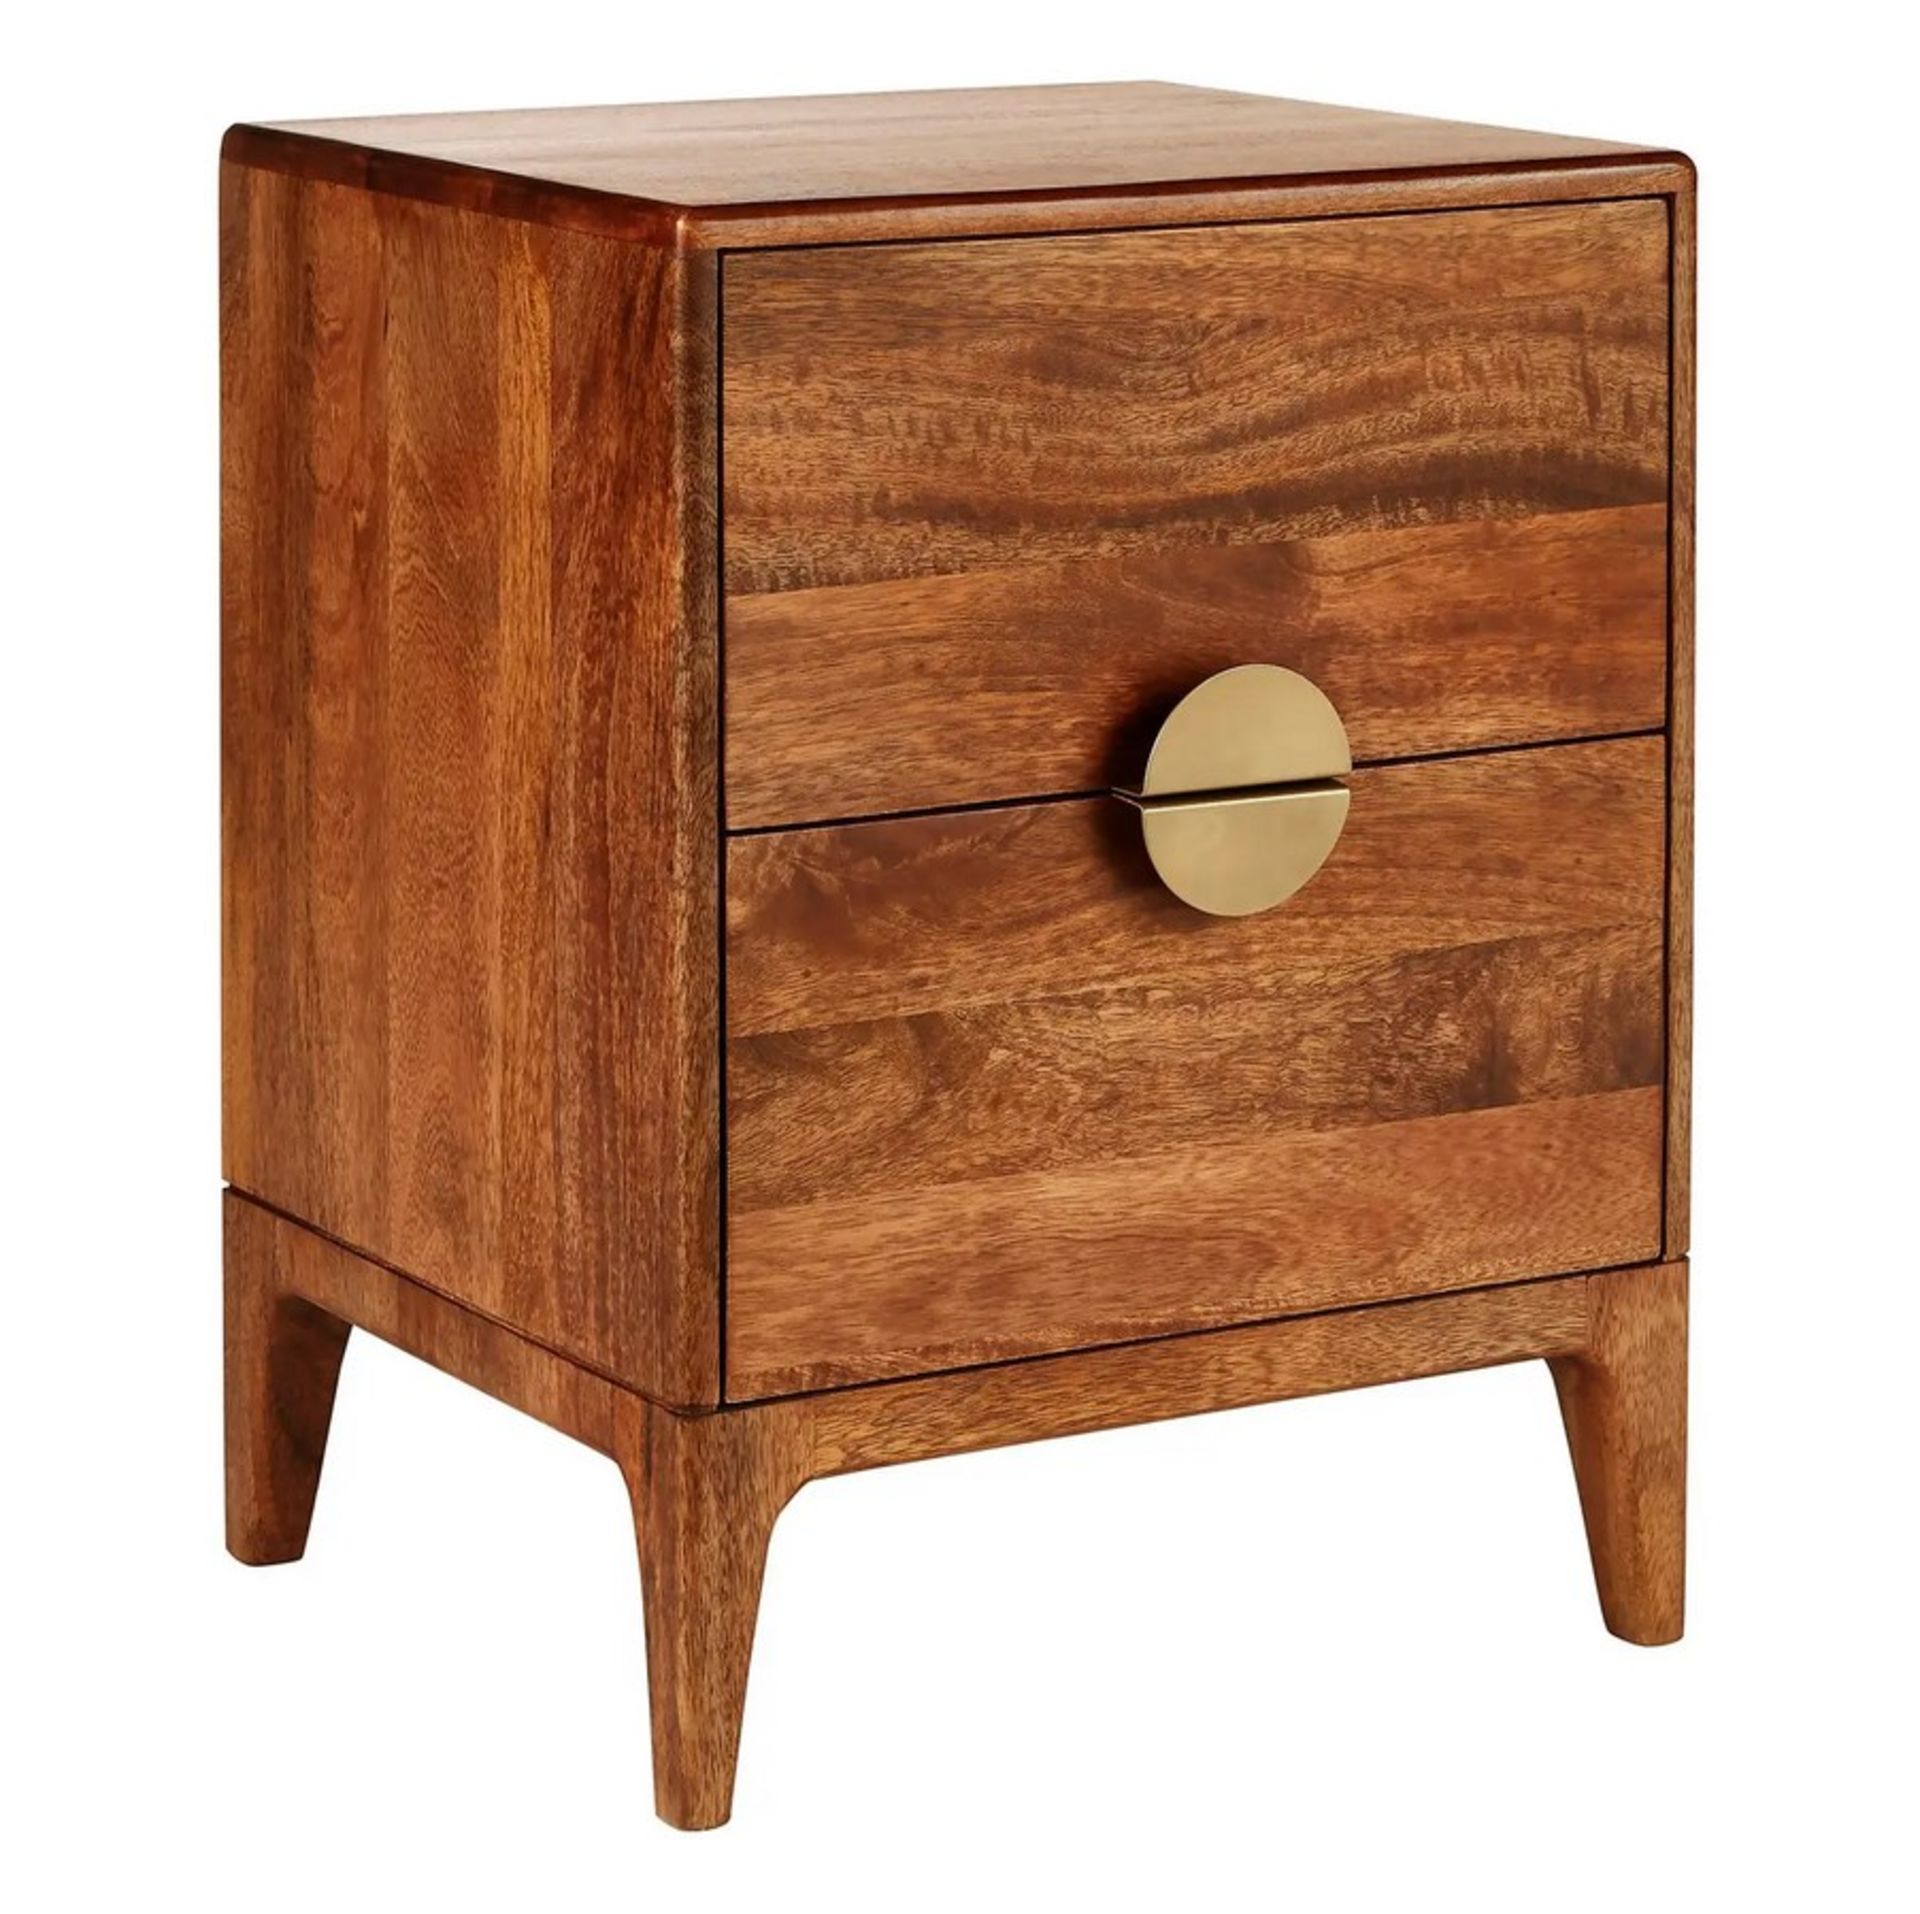 (87/P17) RRP £220. Cooper 2 Drawer Bedside Table. Dimensions: (45 x 38 x 58cm).